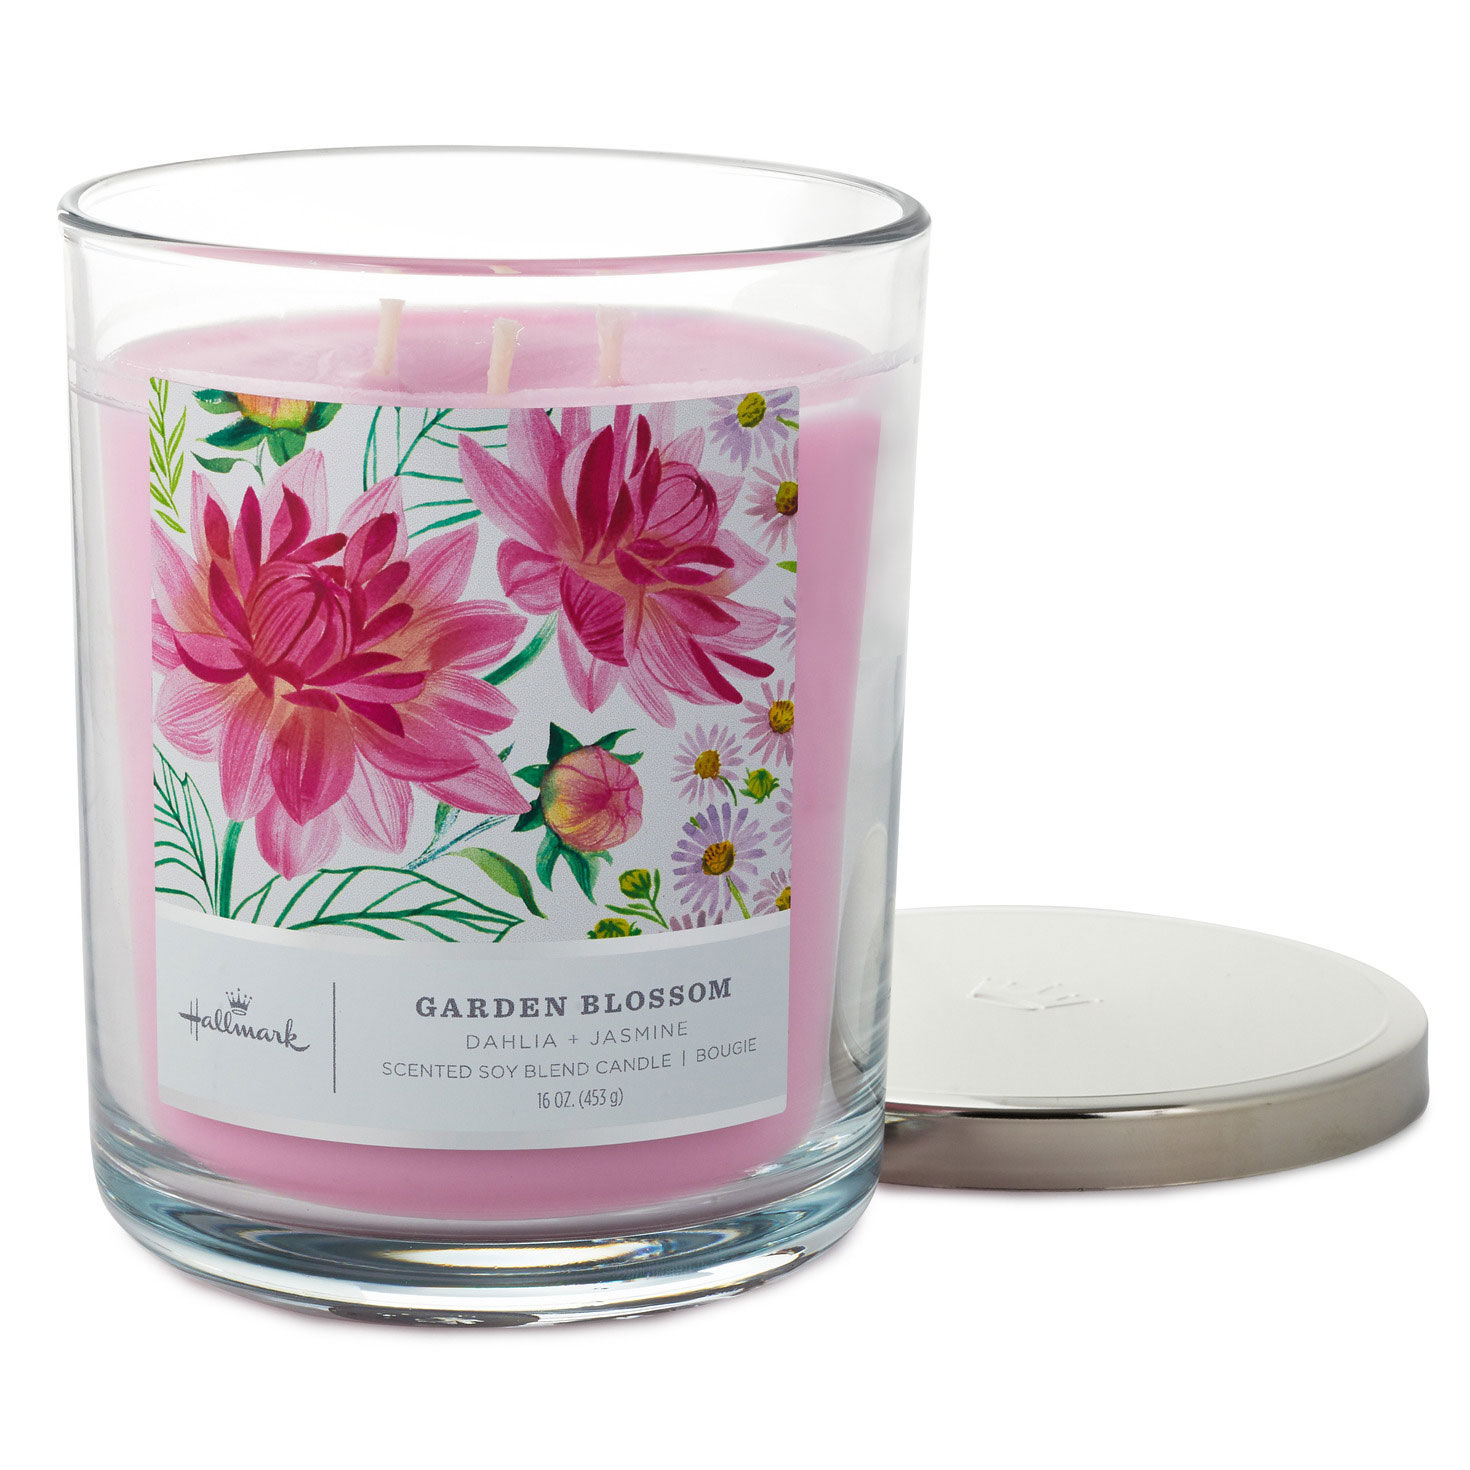 Garden Blossom 3-Wick Jar Candle, 16 oz. for only USD 29.99 | Hallmark